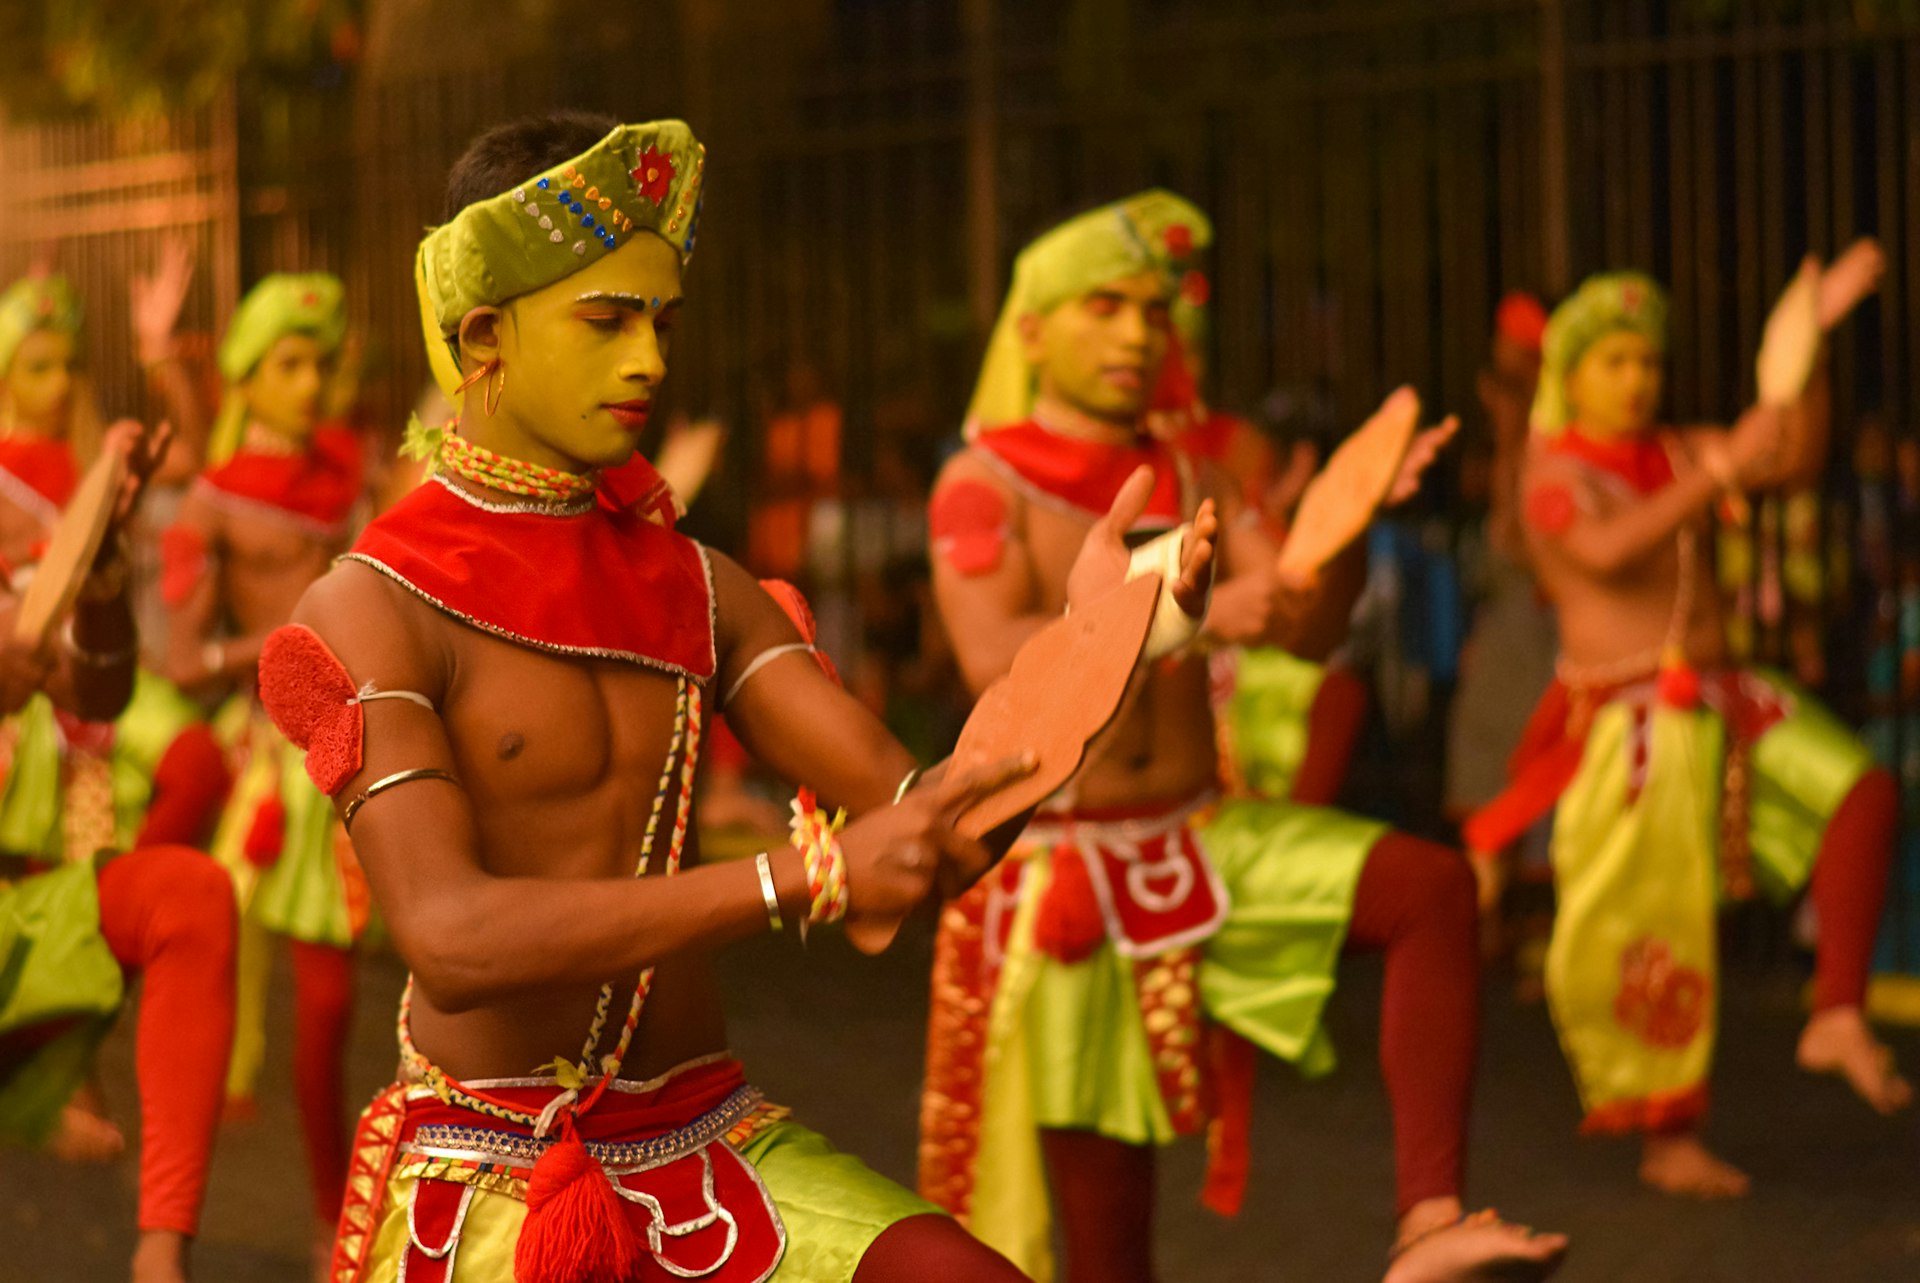 A troupe of male dancers in costume and make up perform together in a row, clapping their hands agains a wooden paddle